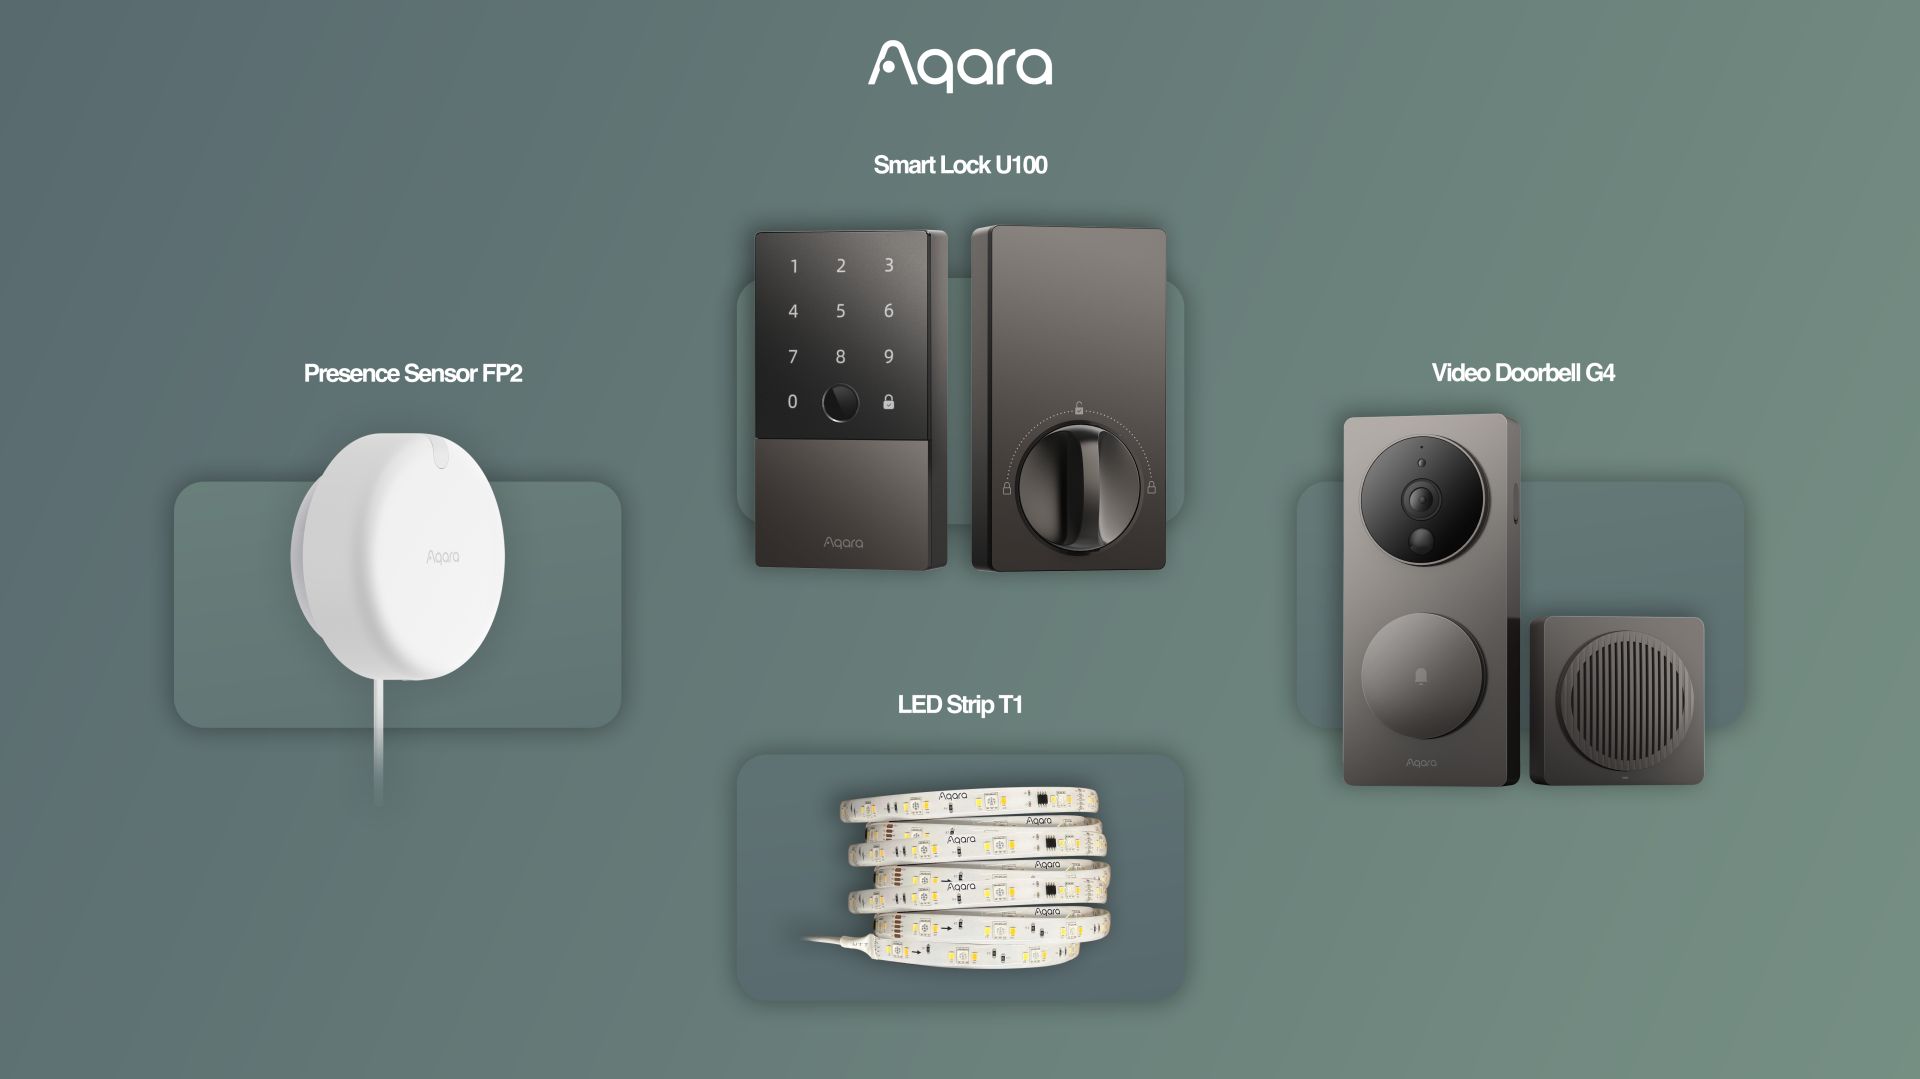 CES 2023: Aqara Announces Video Doorbell G4 With HomeKit Secure Video and Smart Lock U100 With Apple Home Key Support - macrumors.com